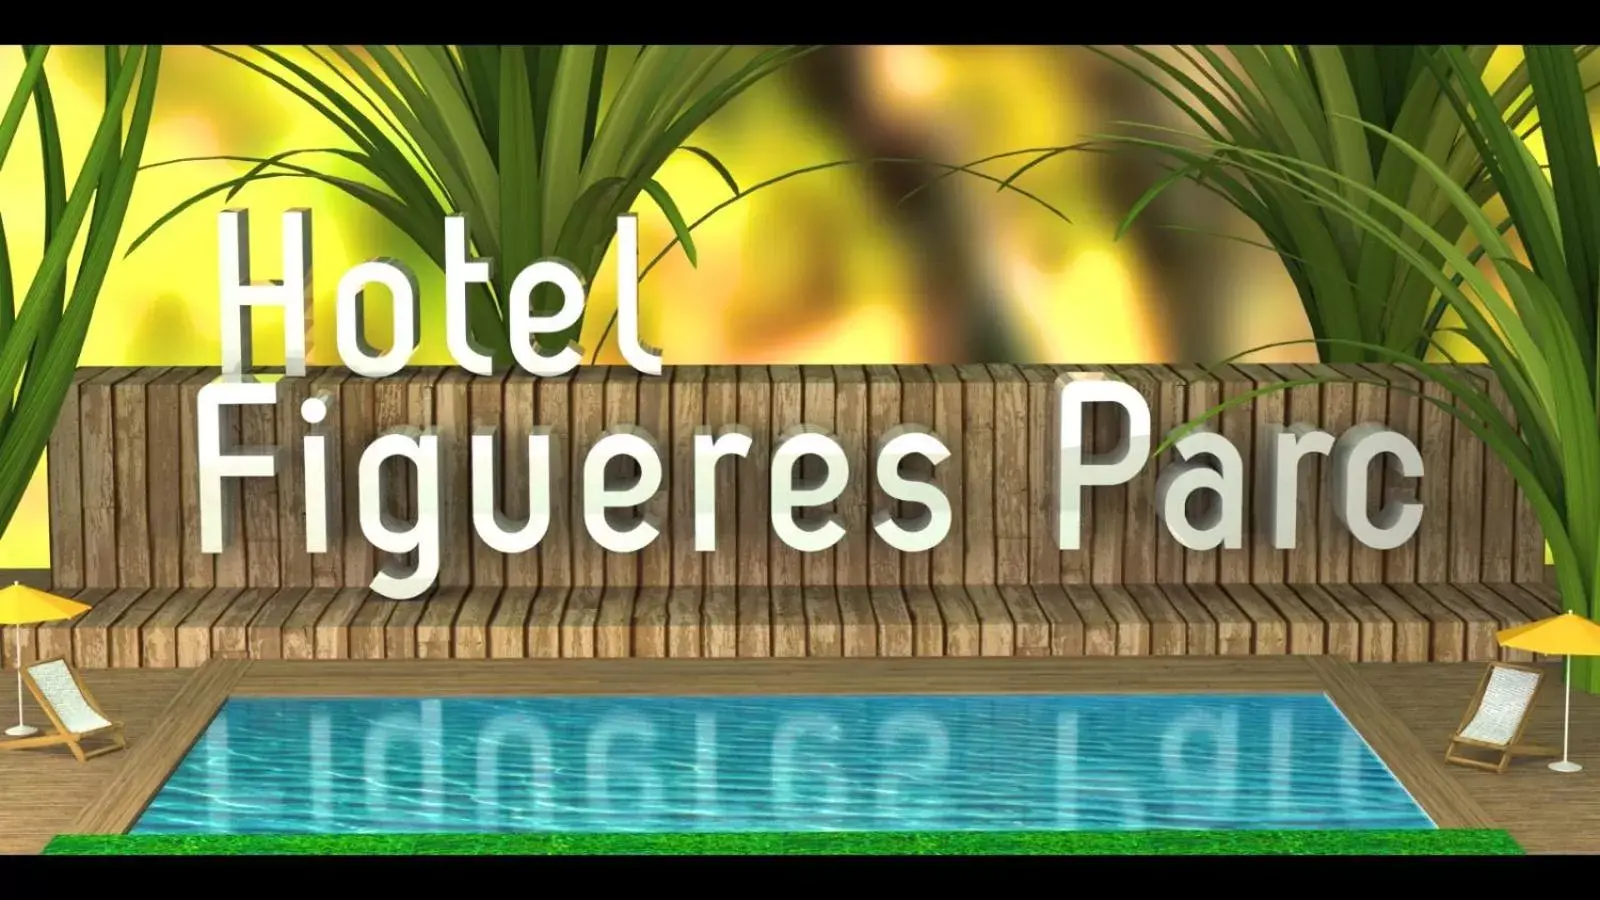 Property logo or sign in Hotel & Restaurant Figueres Parc